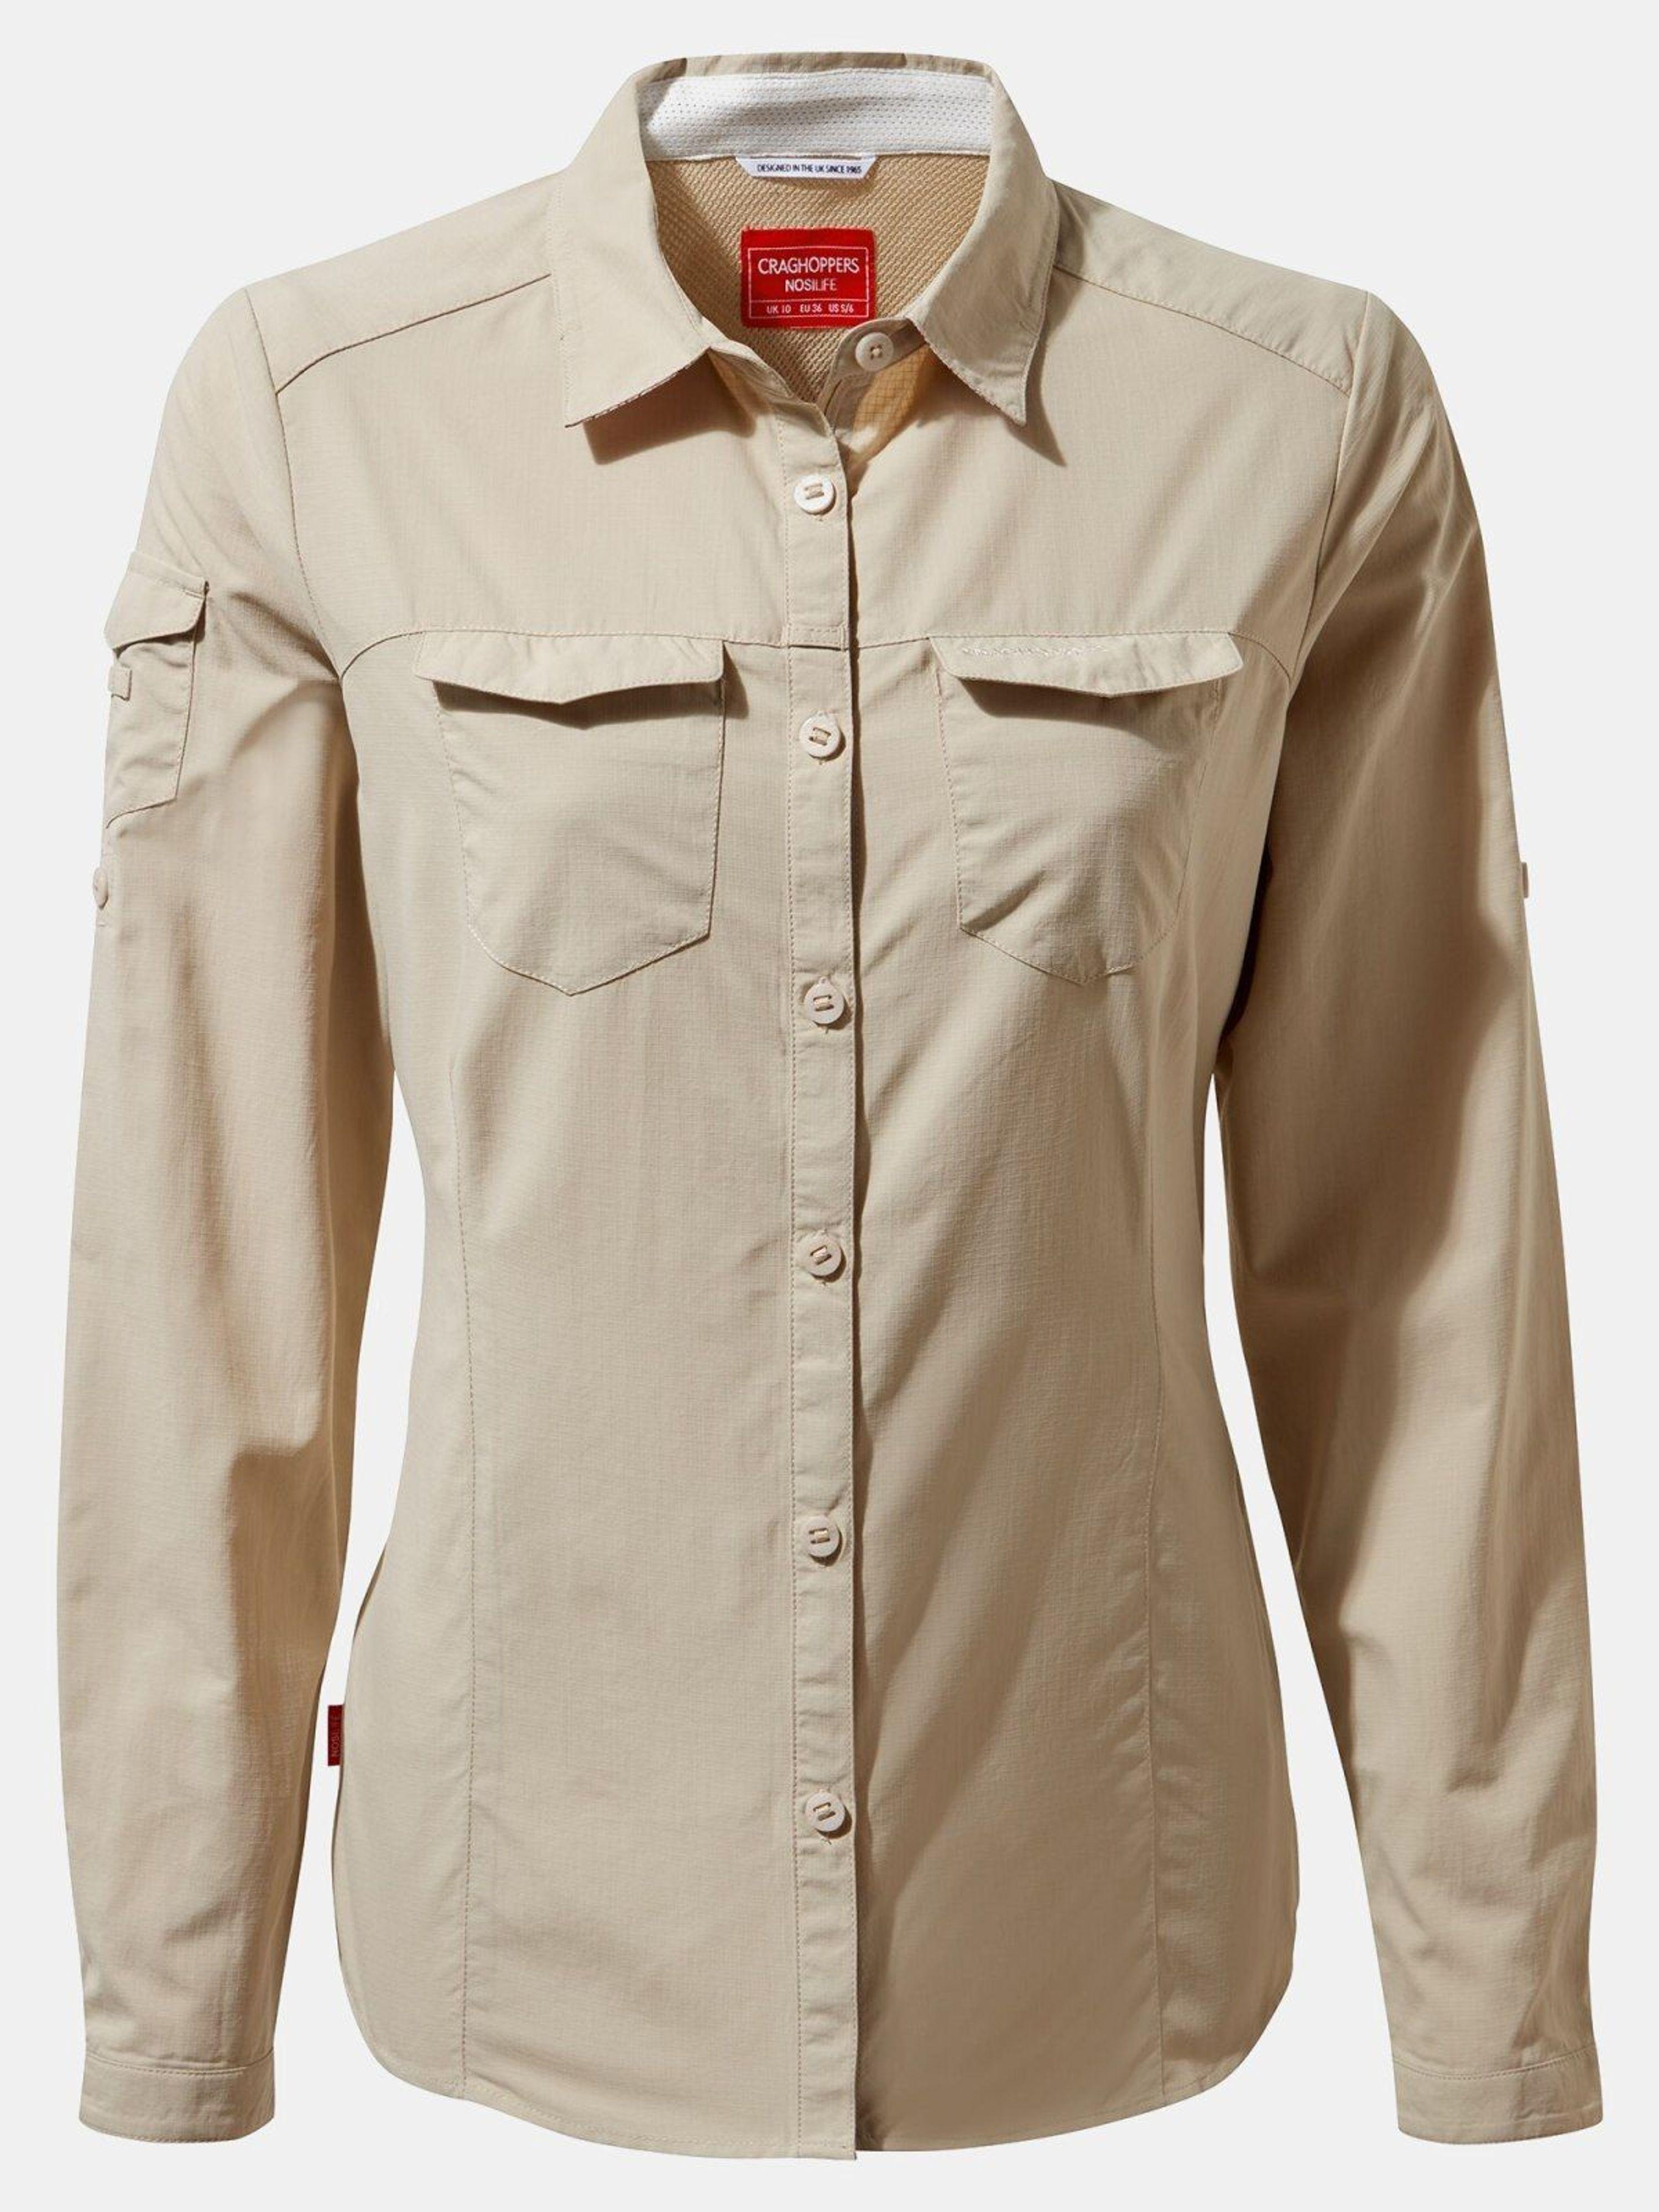 Craghoppers Nosilife Adventure Ii Long Sleeved Shirt in Natural | Lyst